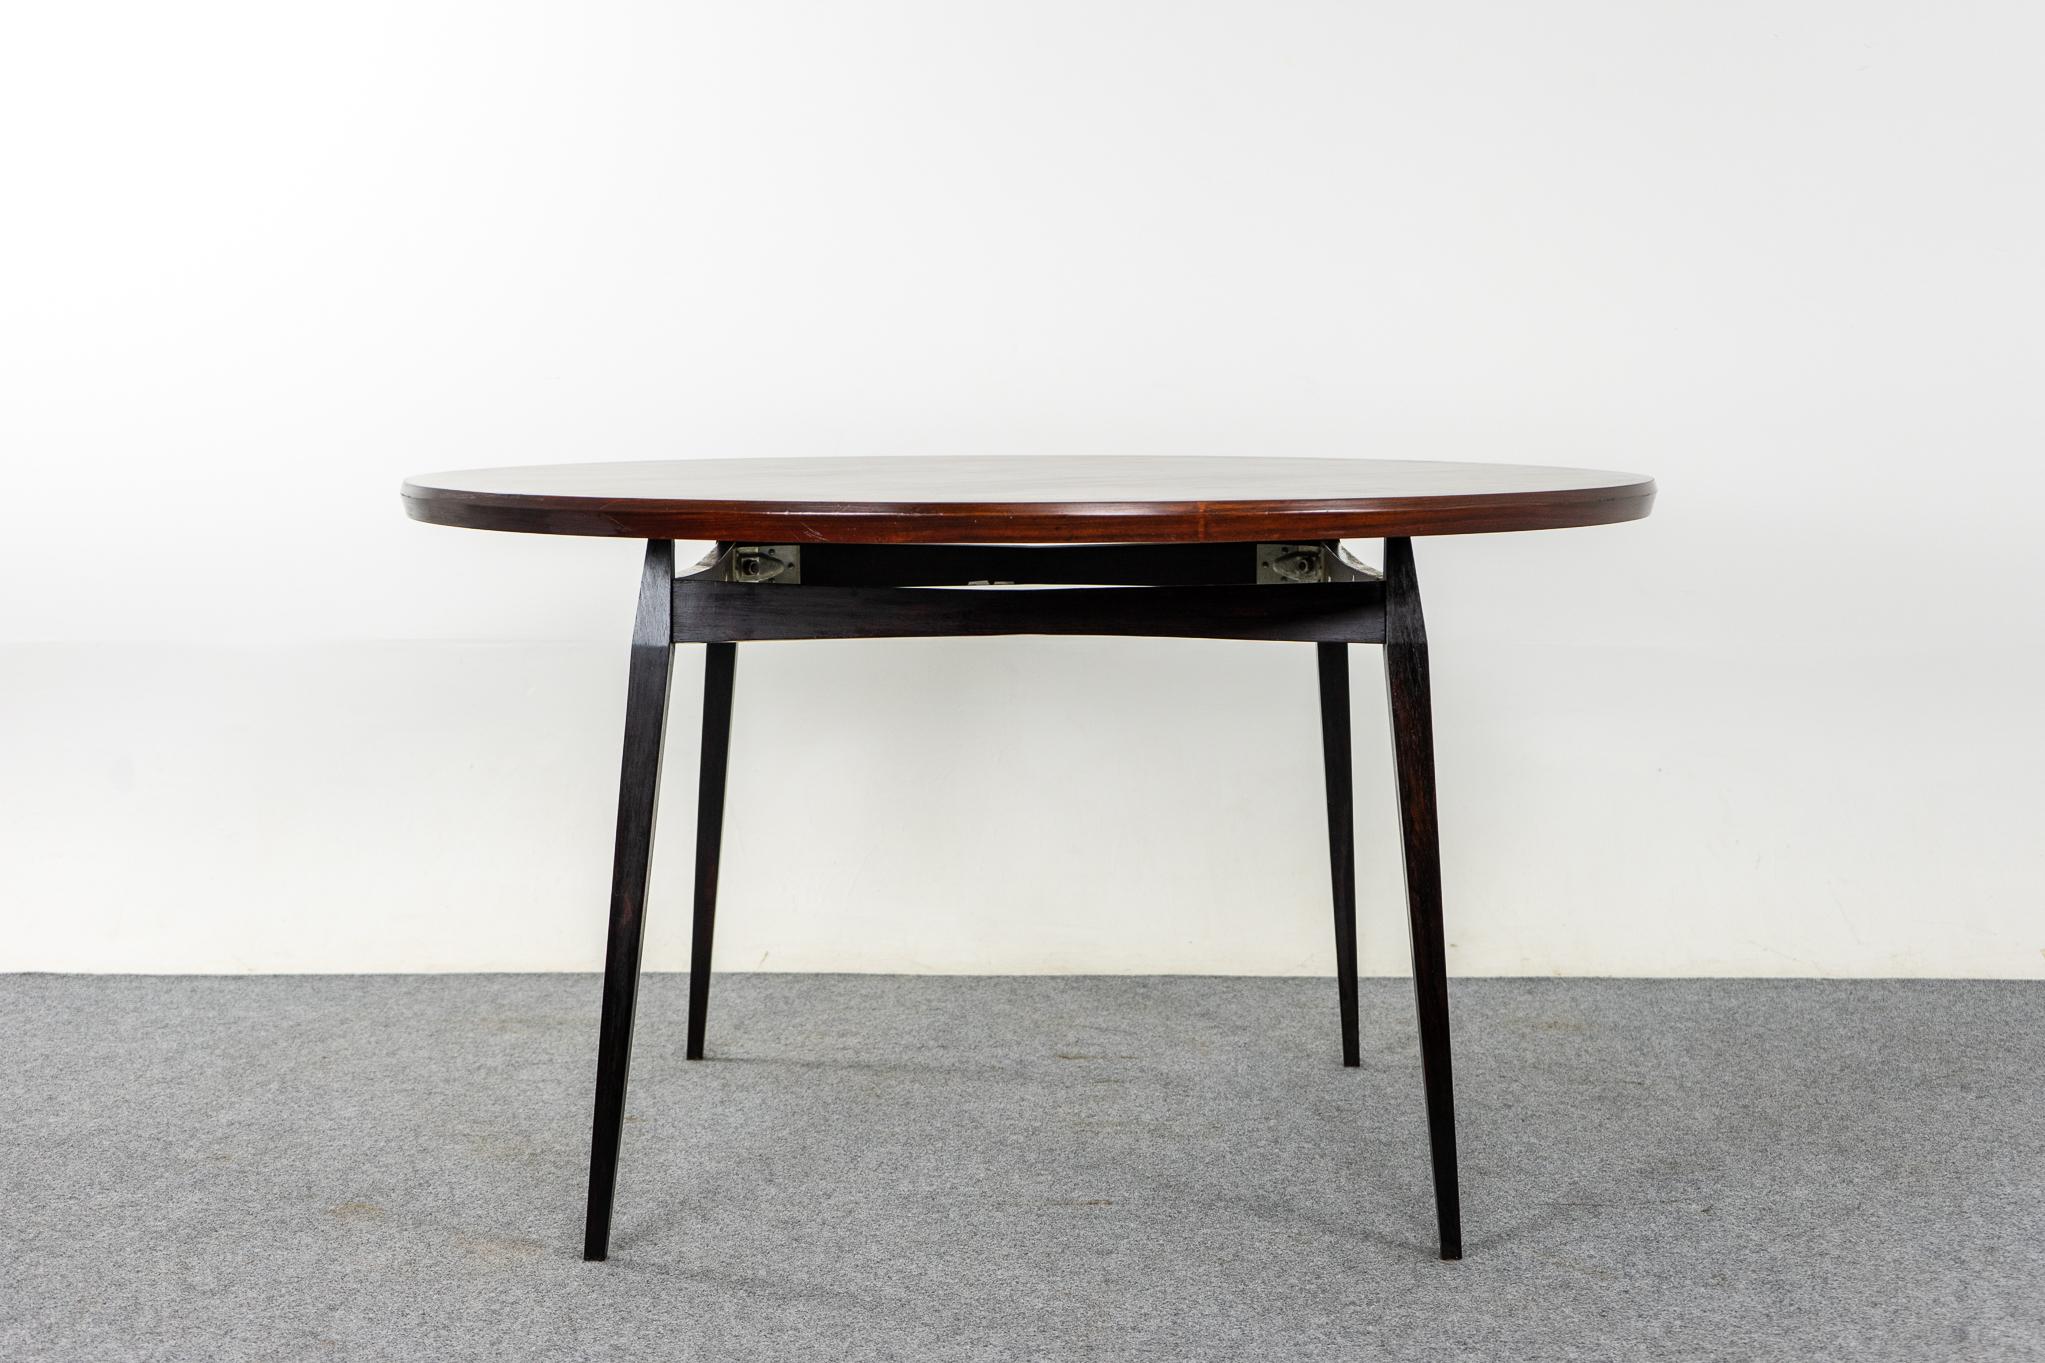 Rosewood Danish dining table, circa 1960's. Table top boasts highly figured grain patterns in the veneer. The floating top rests on a unique contrasting angular base, very complimentary! Round tables create space and more intimate dinner settings,